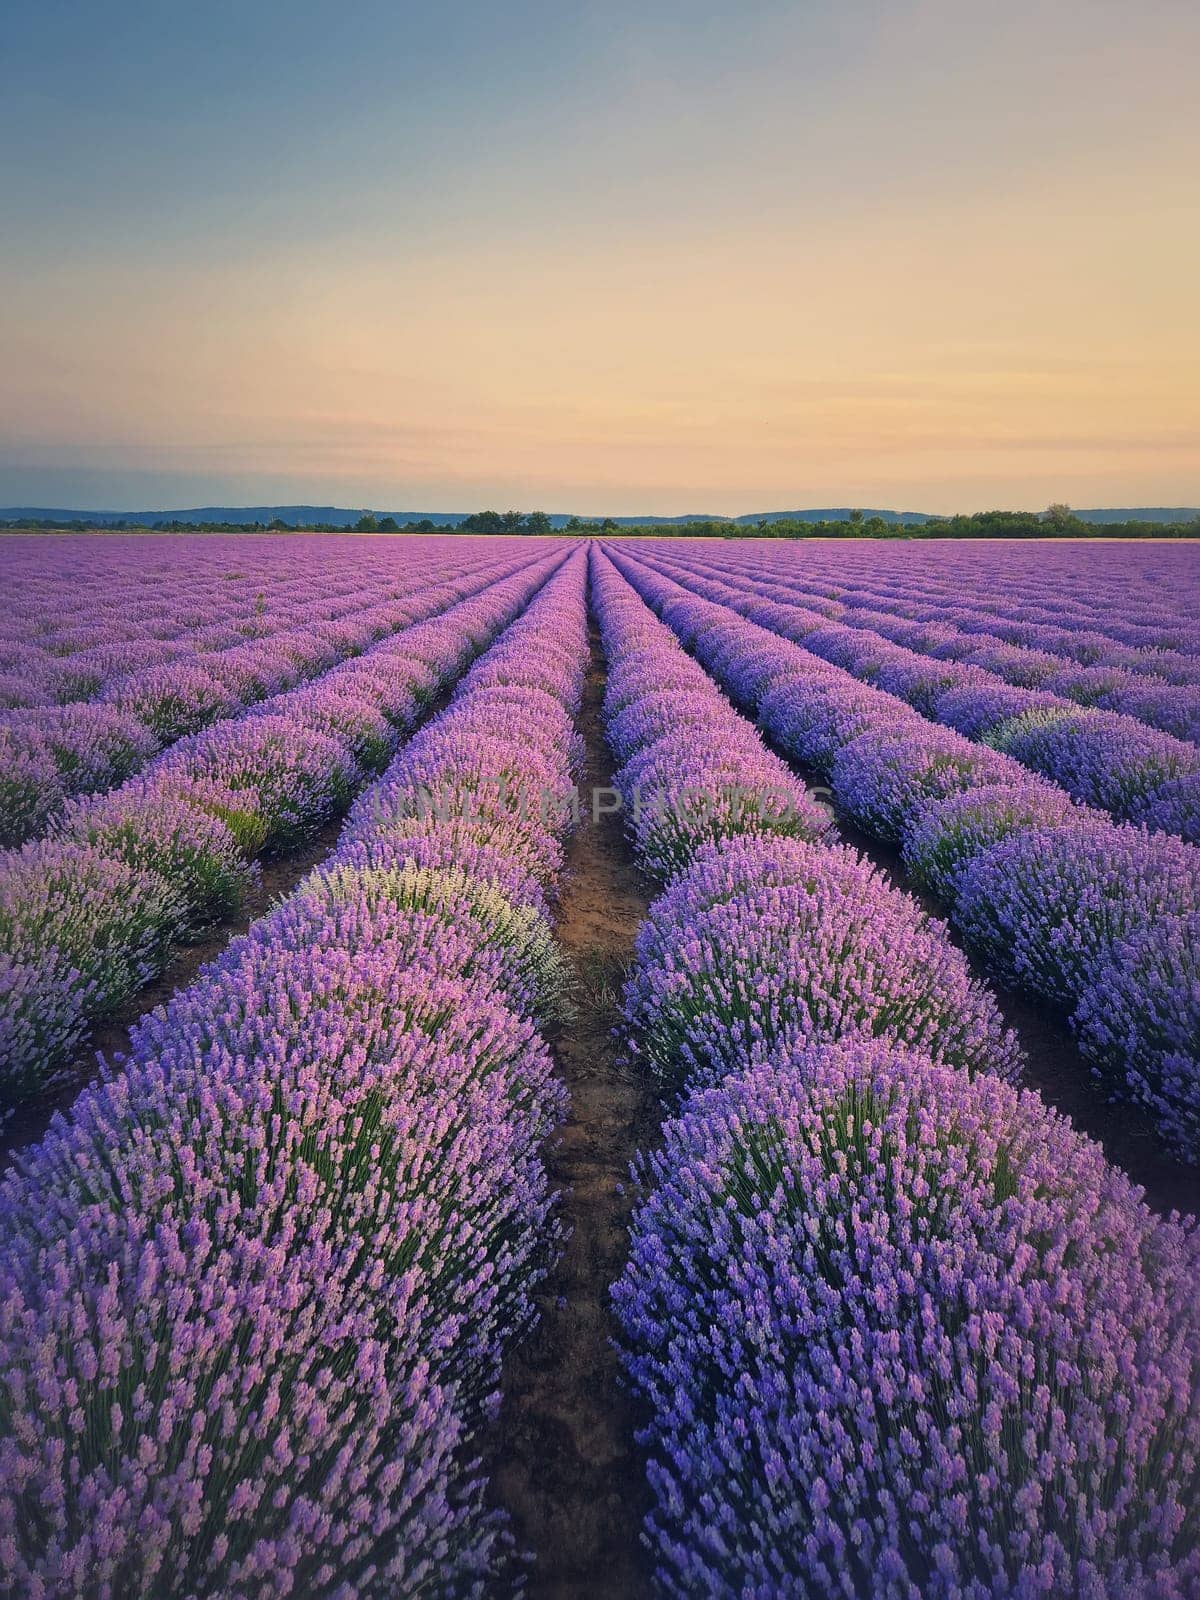 Picturesque scene of blooming lavender field. Beautiful purple pink flowers in warm summer light. Fragrant lavandula plants blossoms in the meadow, vertical background by psychoshadow